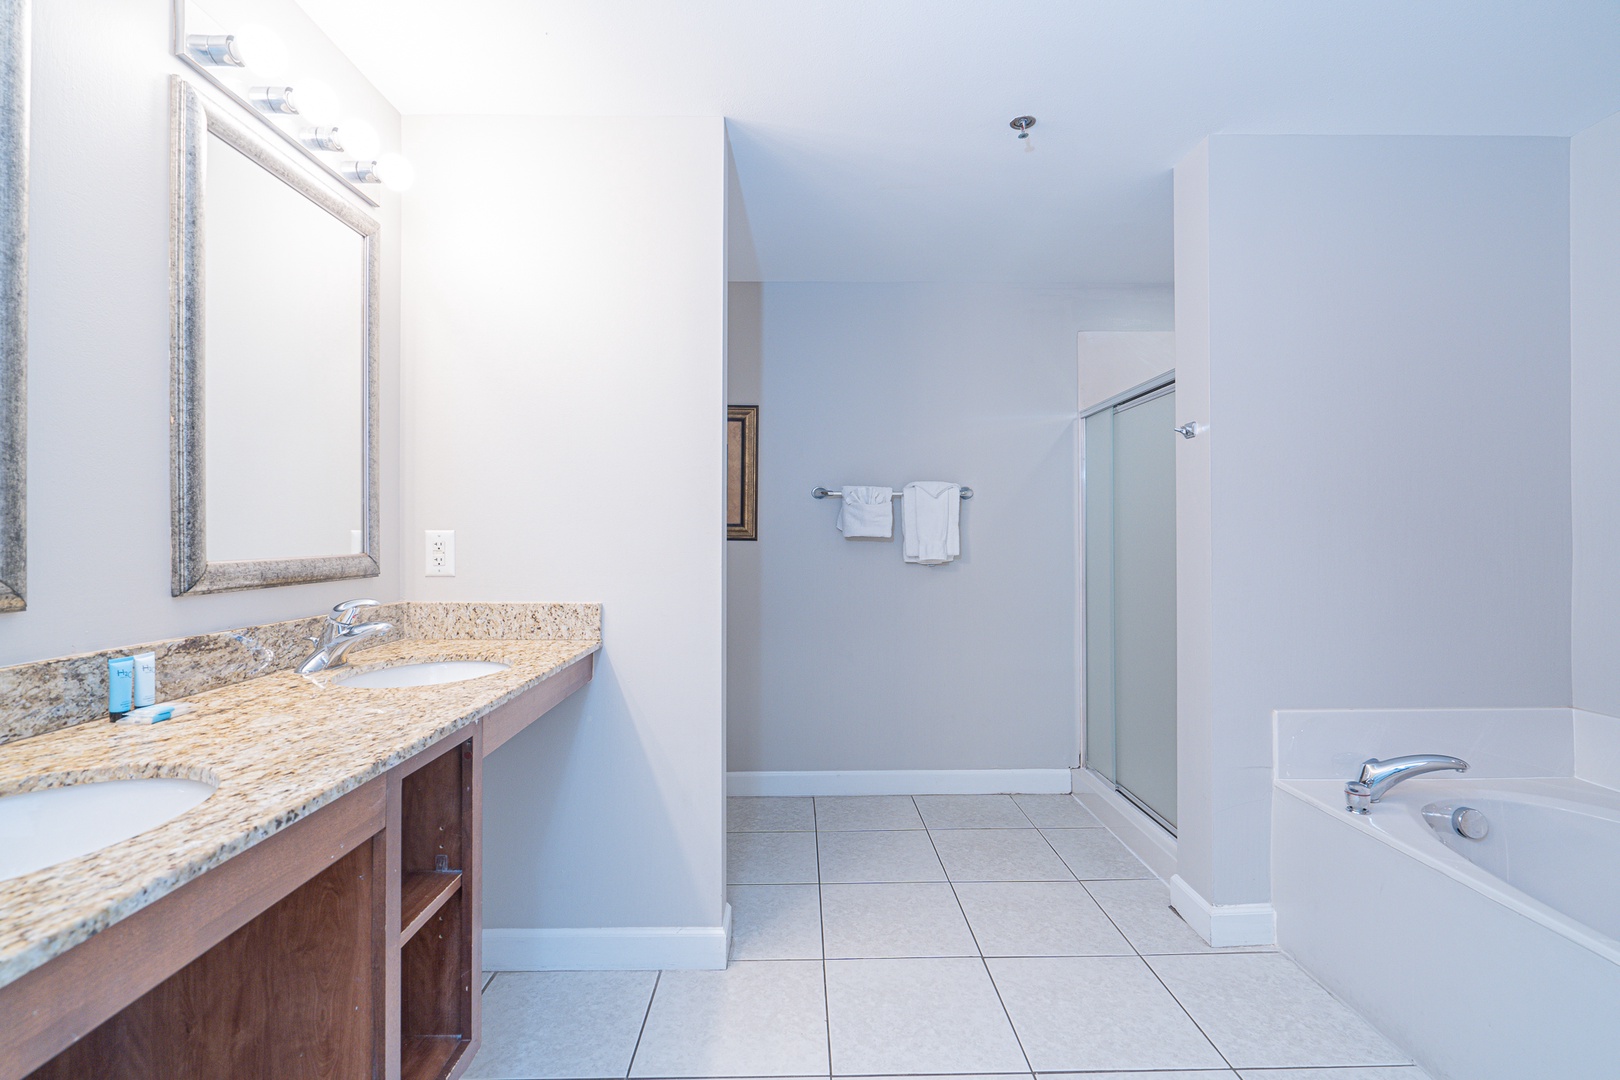 The master ensuite offers a double vanity, glass shower, & soaking tub